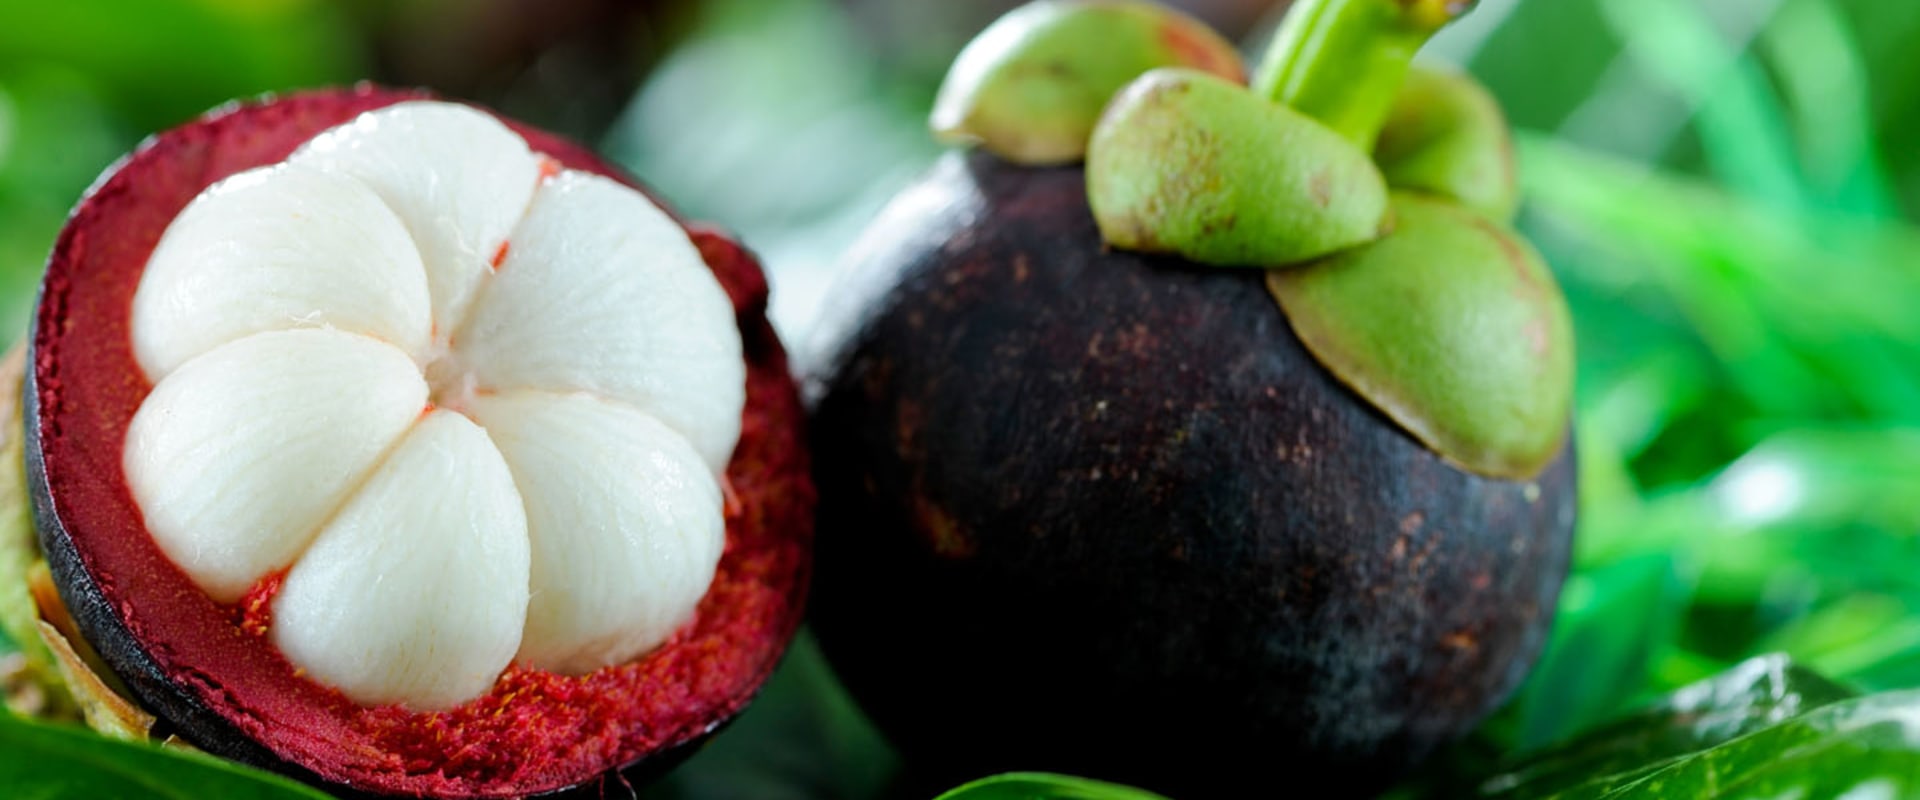 Is mangosteen good for your hair?